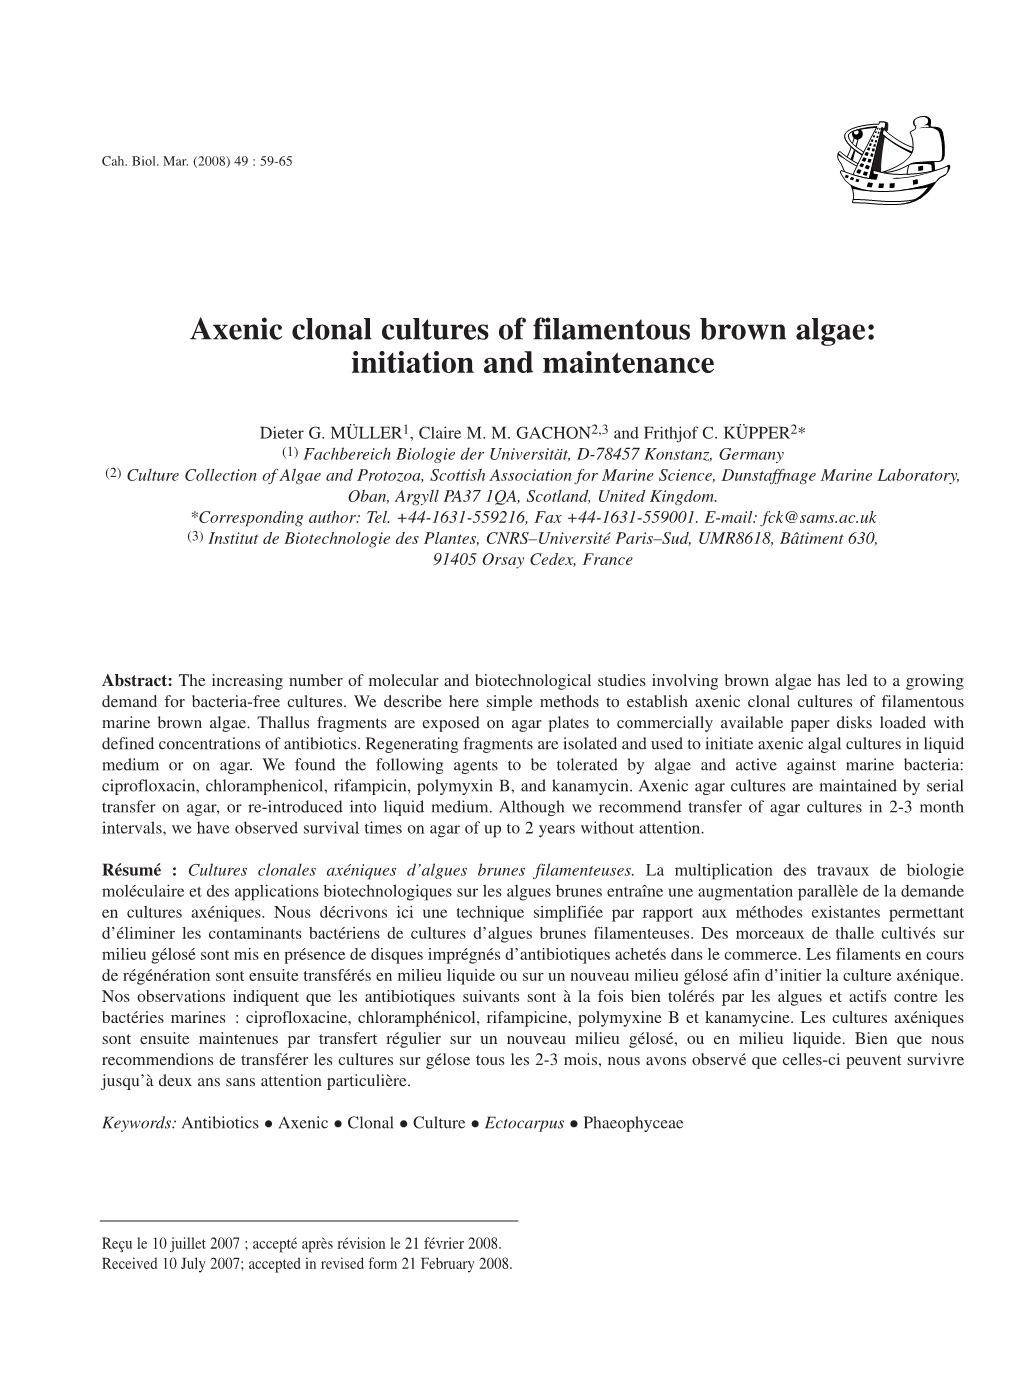 Axenic Clonal Cultures of Filamentous Brown Algae: Initiation and Maintenance